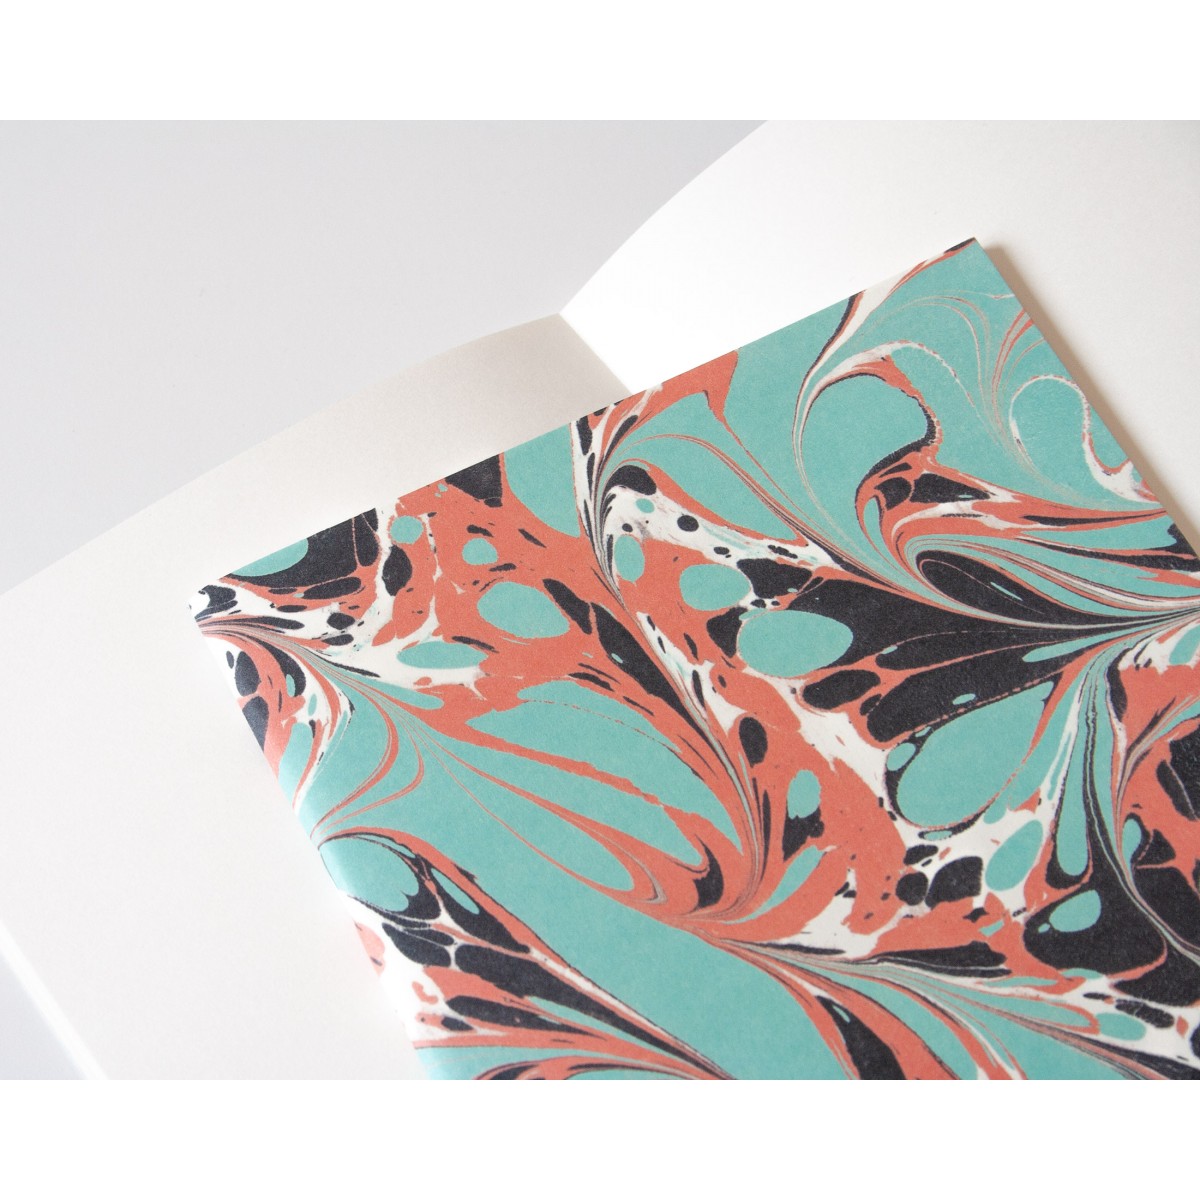 Notizheft A5 Marmor mint koralle // Papaya paper products